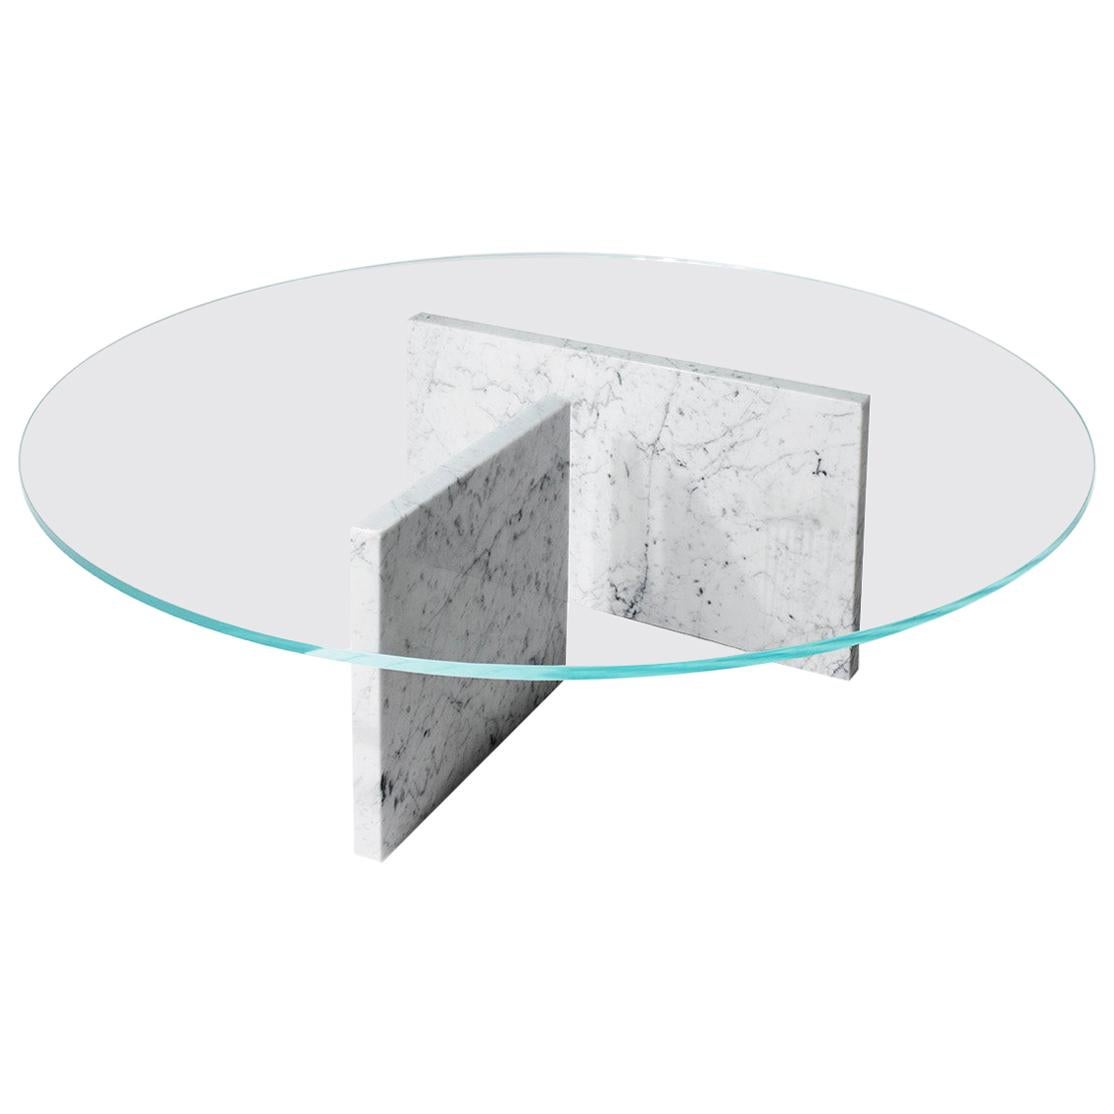 Claste Remember Me Round High Coffee Table in Carrara Gioa Marble with Glass Top